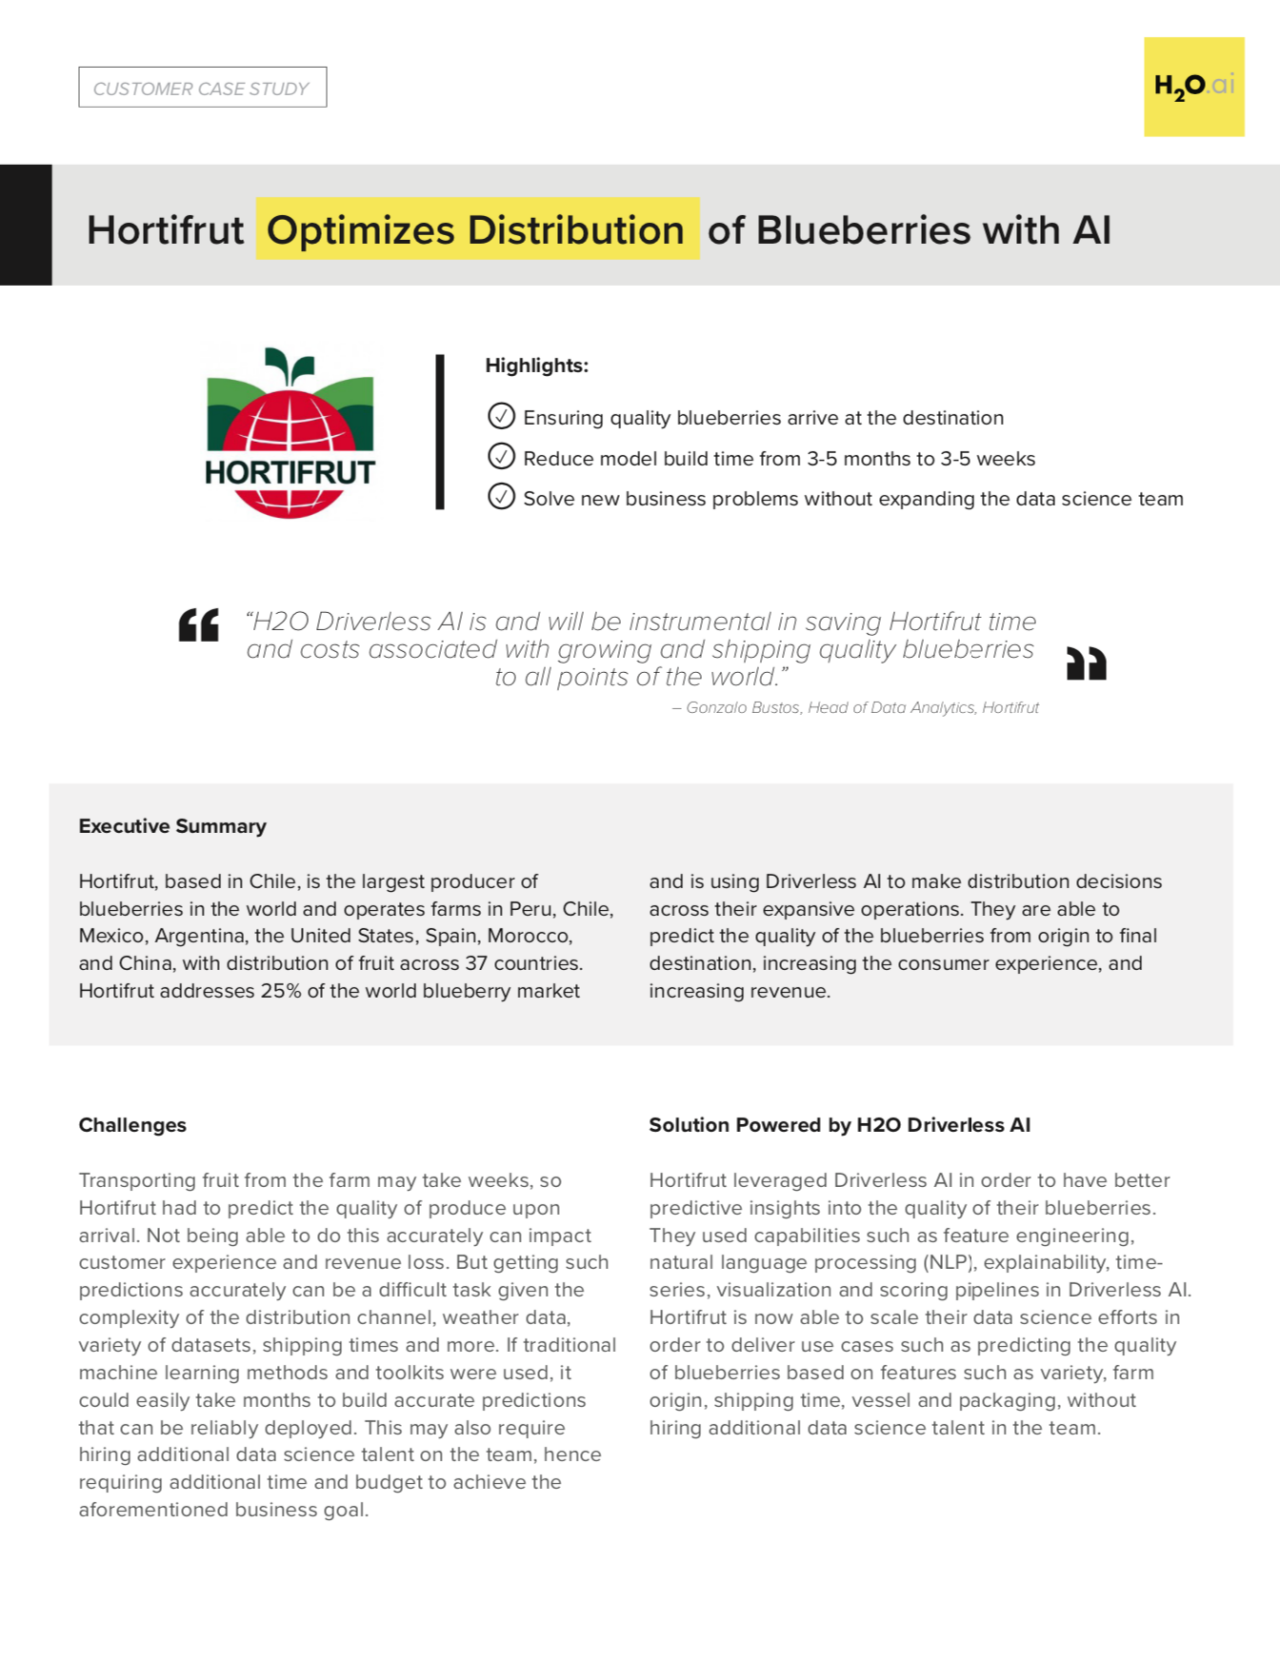 Hortifrut Optimizes Distribution of Blueberries with AI